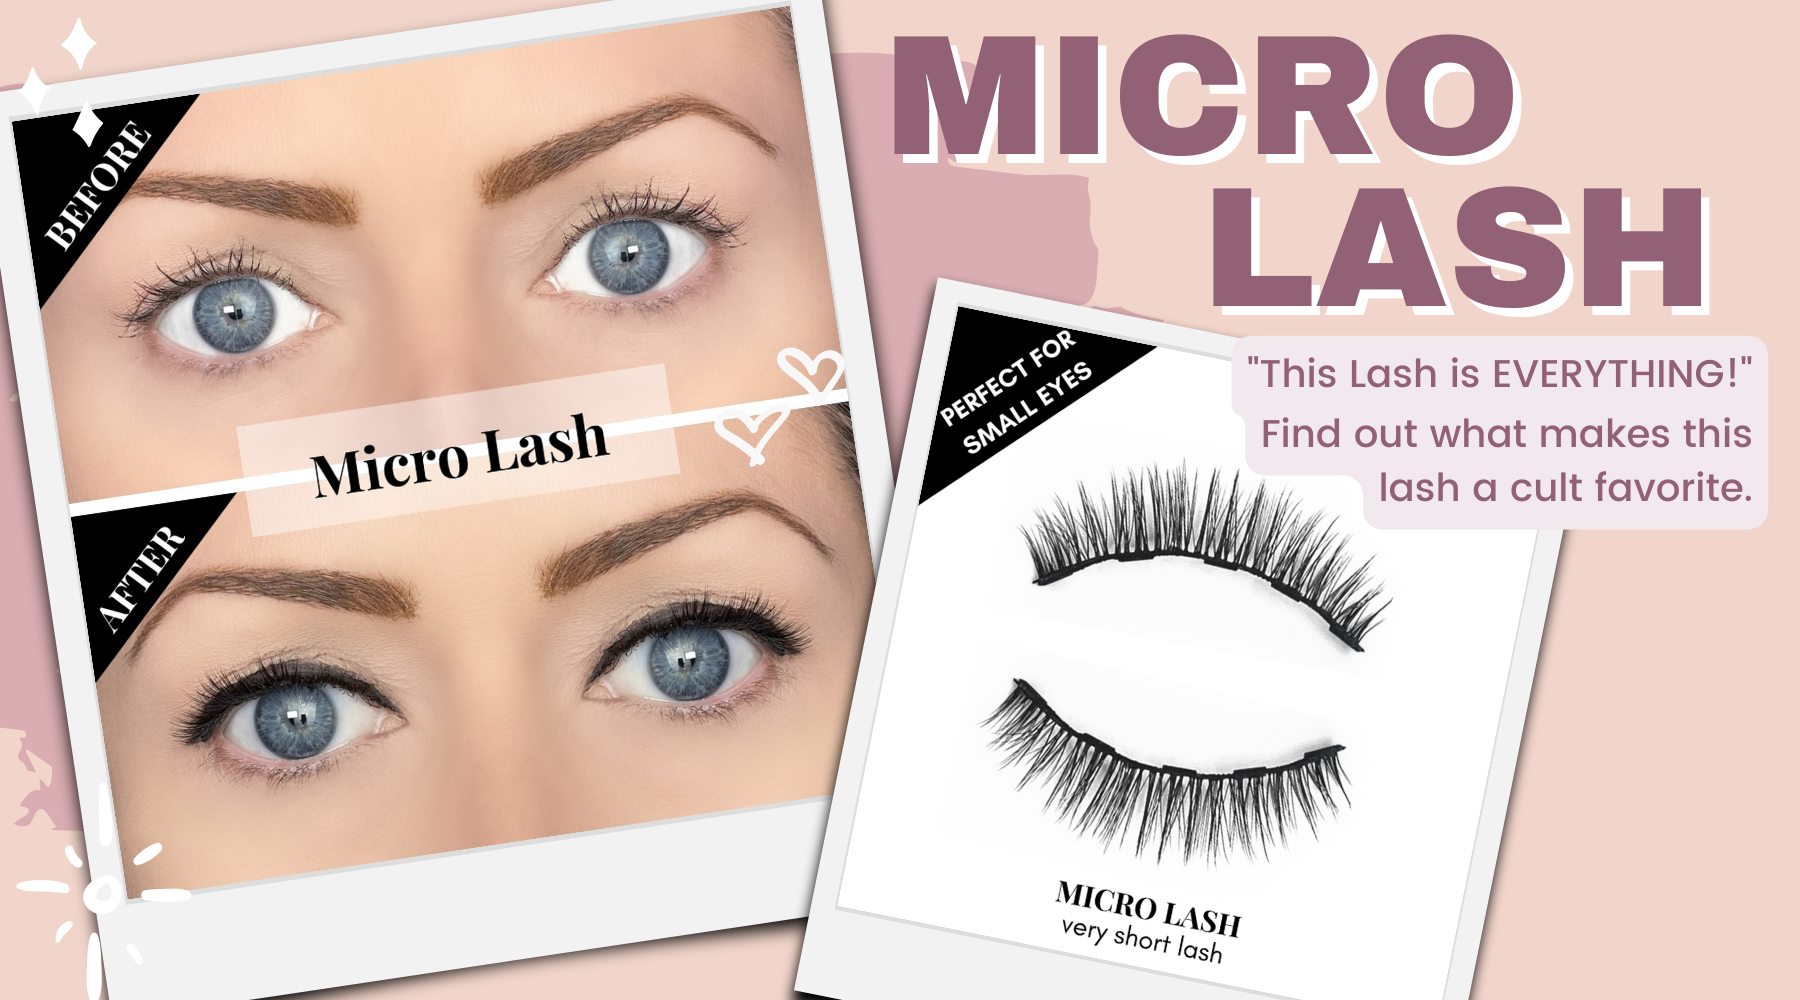 Effortlessly Enhance Your Natural Beauty with MICRO LASH: Extra Tiny Magnetic Lashes for a Subtle, Elegant Look